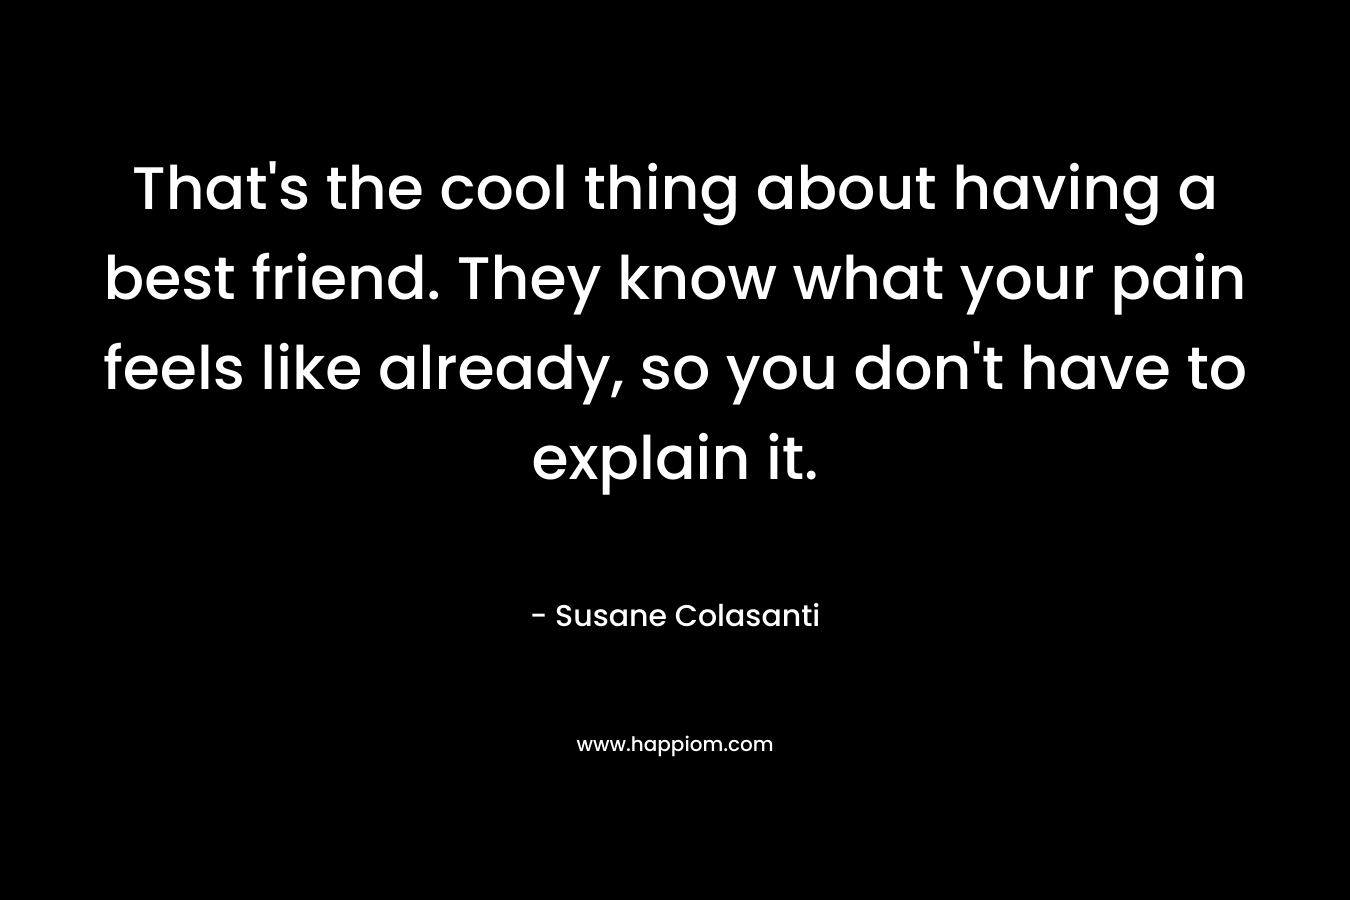 That's the cool thing about having a best friend. They know what your pain feels like already, so you don't have to explain it.